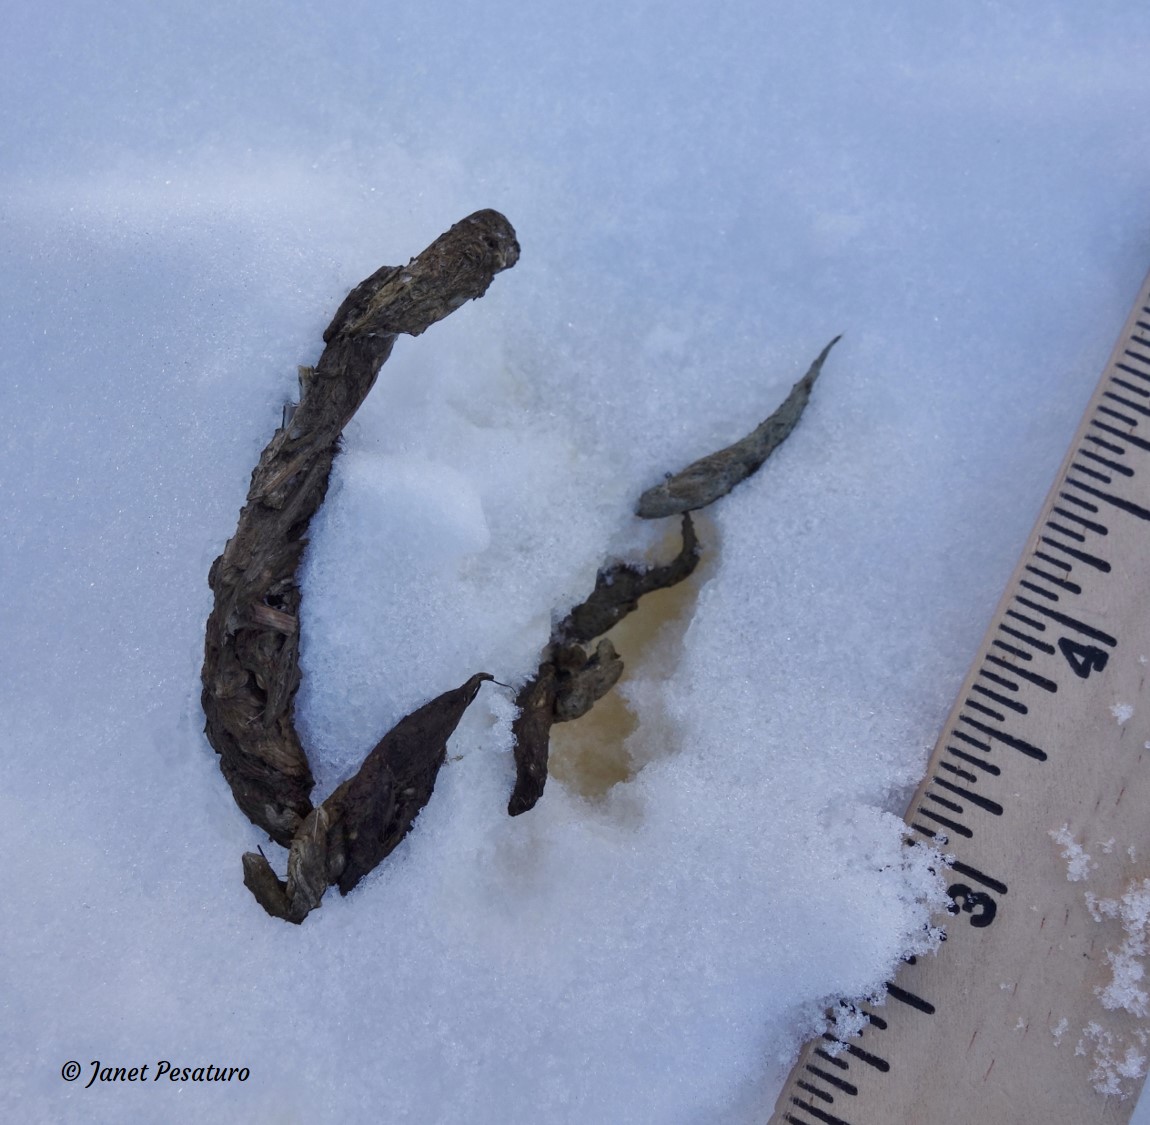 marten tracks and sign, this one showing marten scat and urine